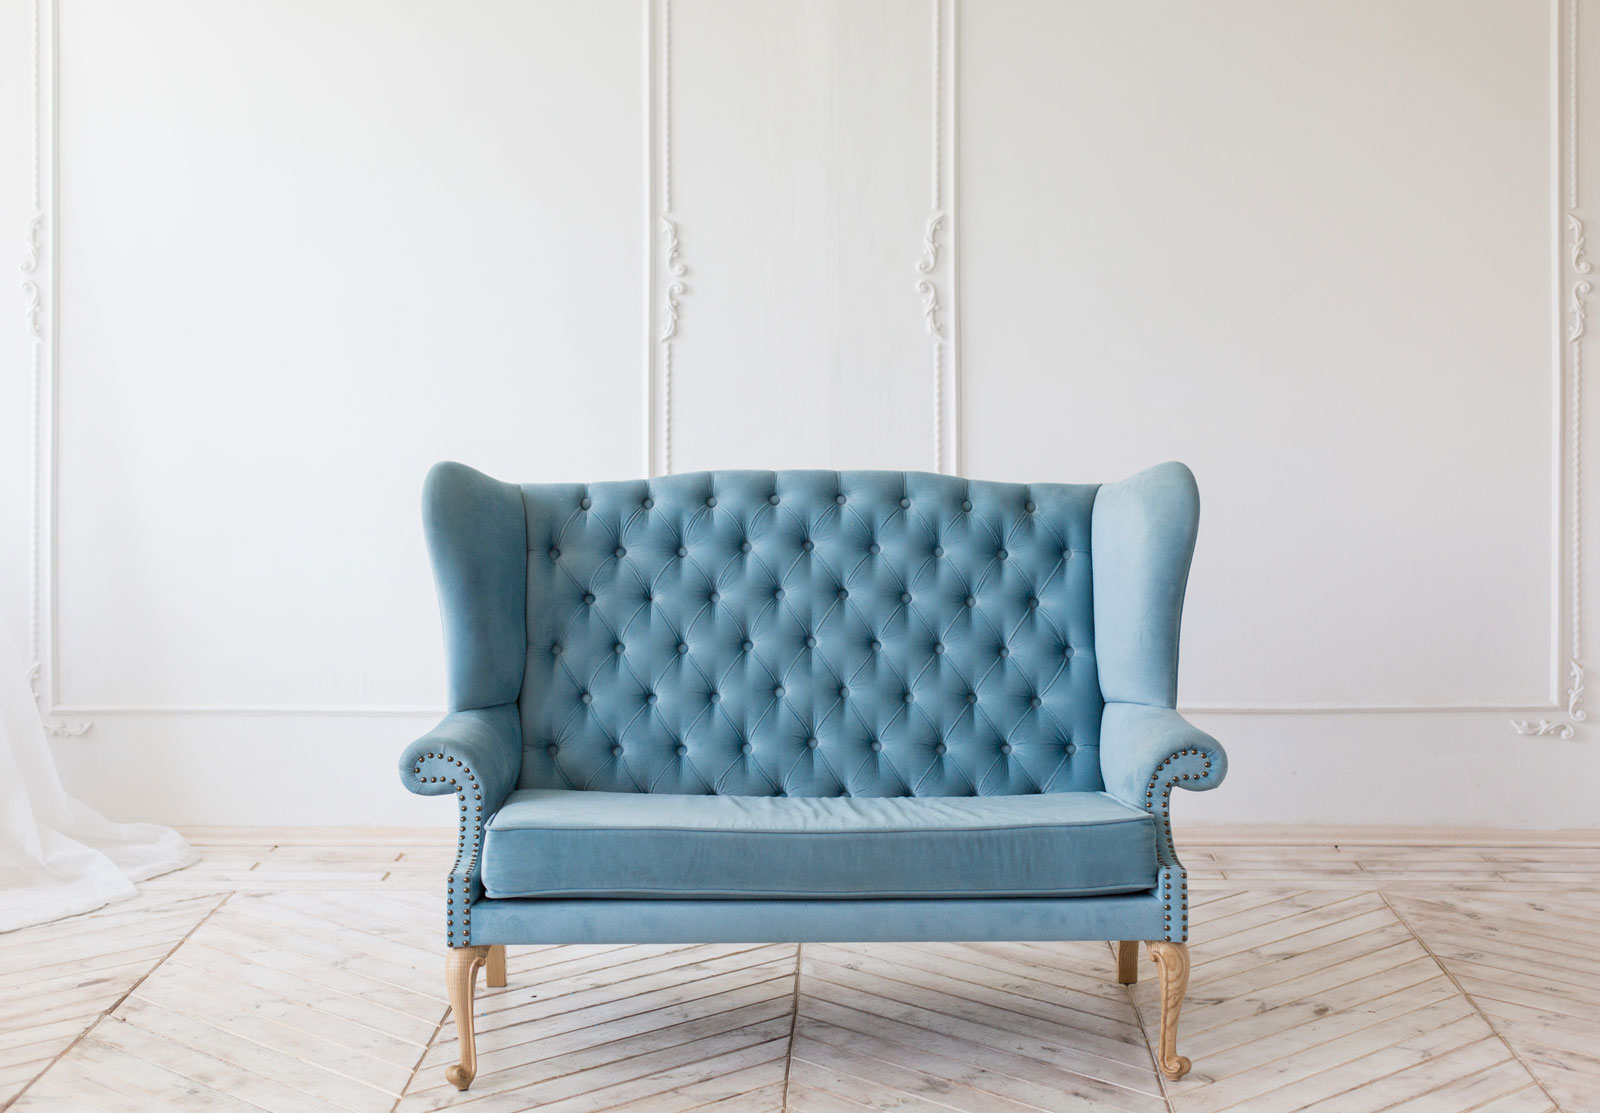 A Baby Blue Color Paneled Cushion Sofa in a White Background